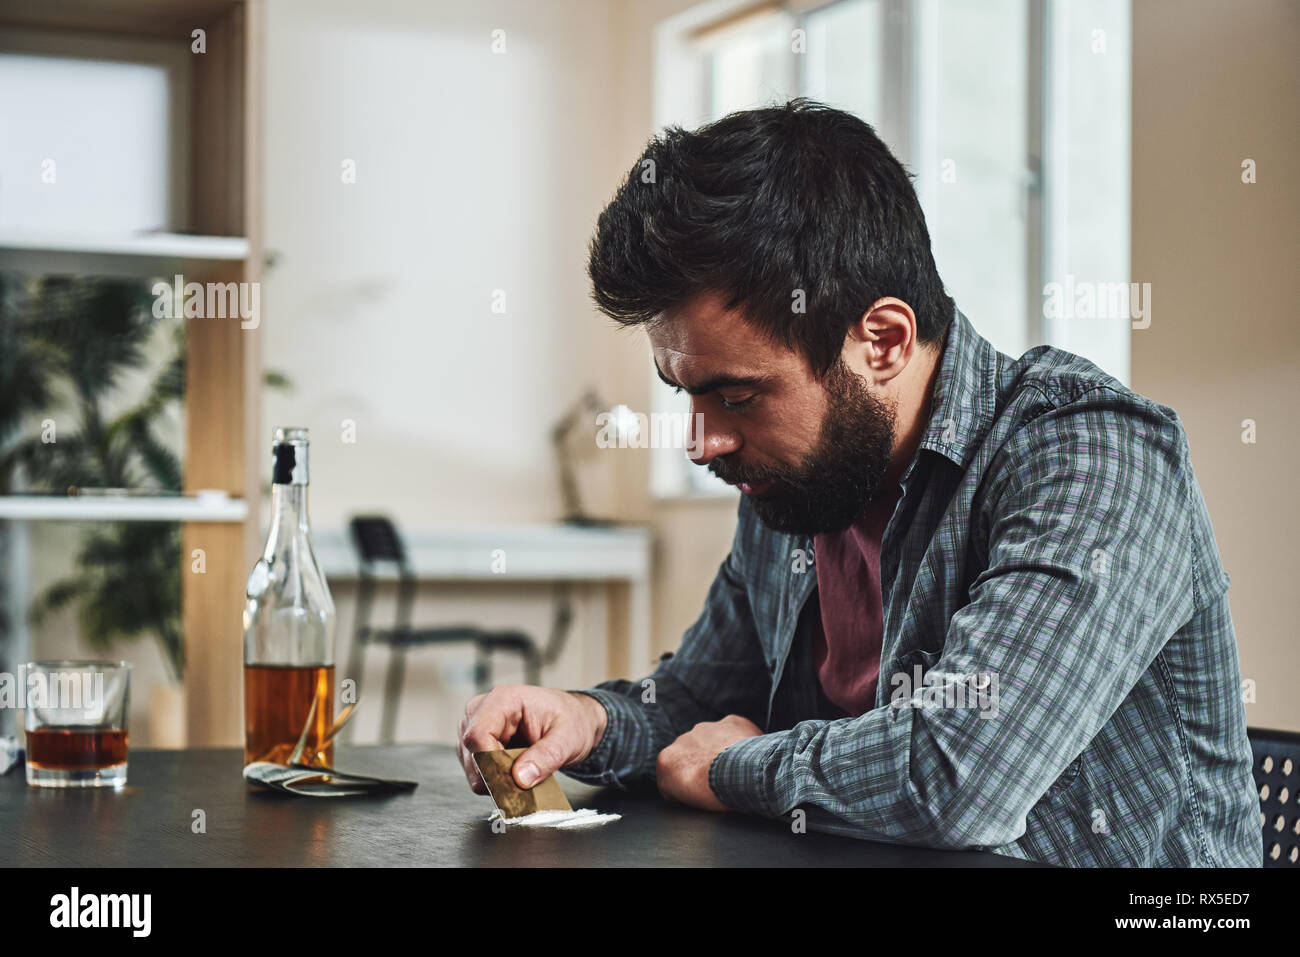 Depressed bearded man sits at the table, preparing to snort a line of cocaine using bank note. He is suffering from problems at work and troubles in r Stock Photo